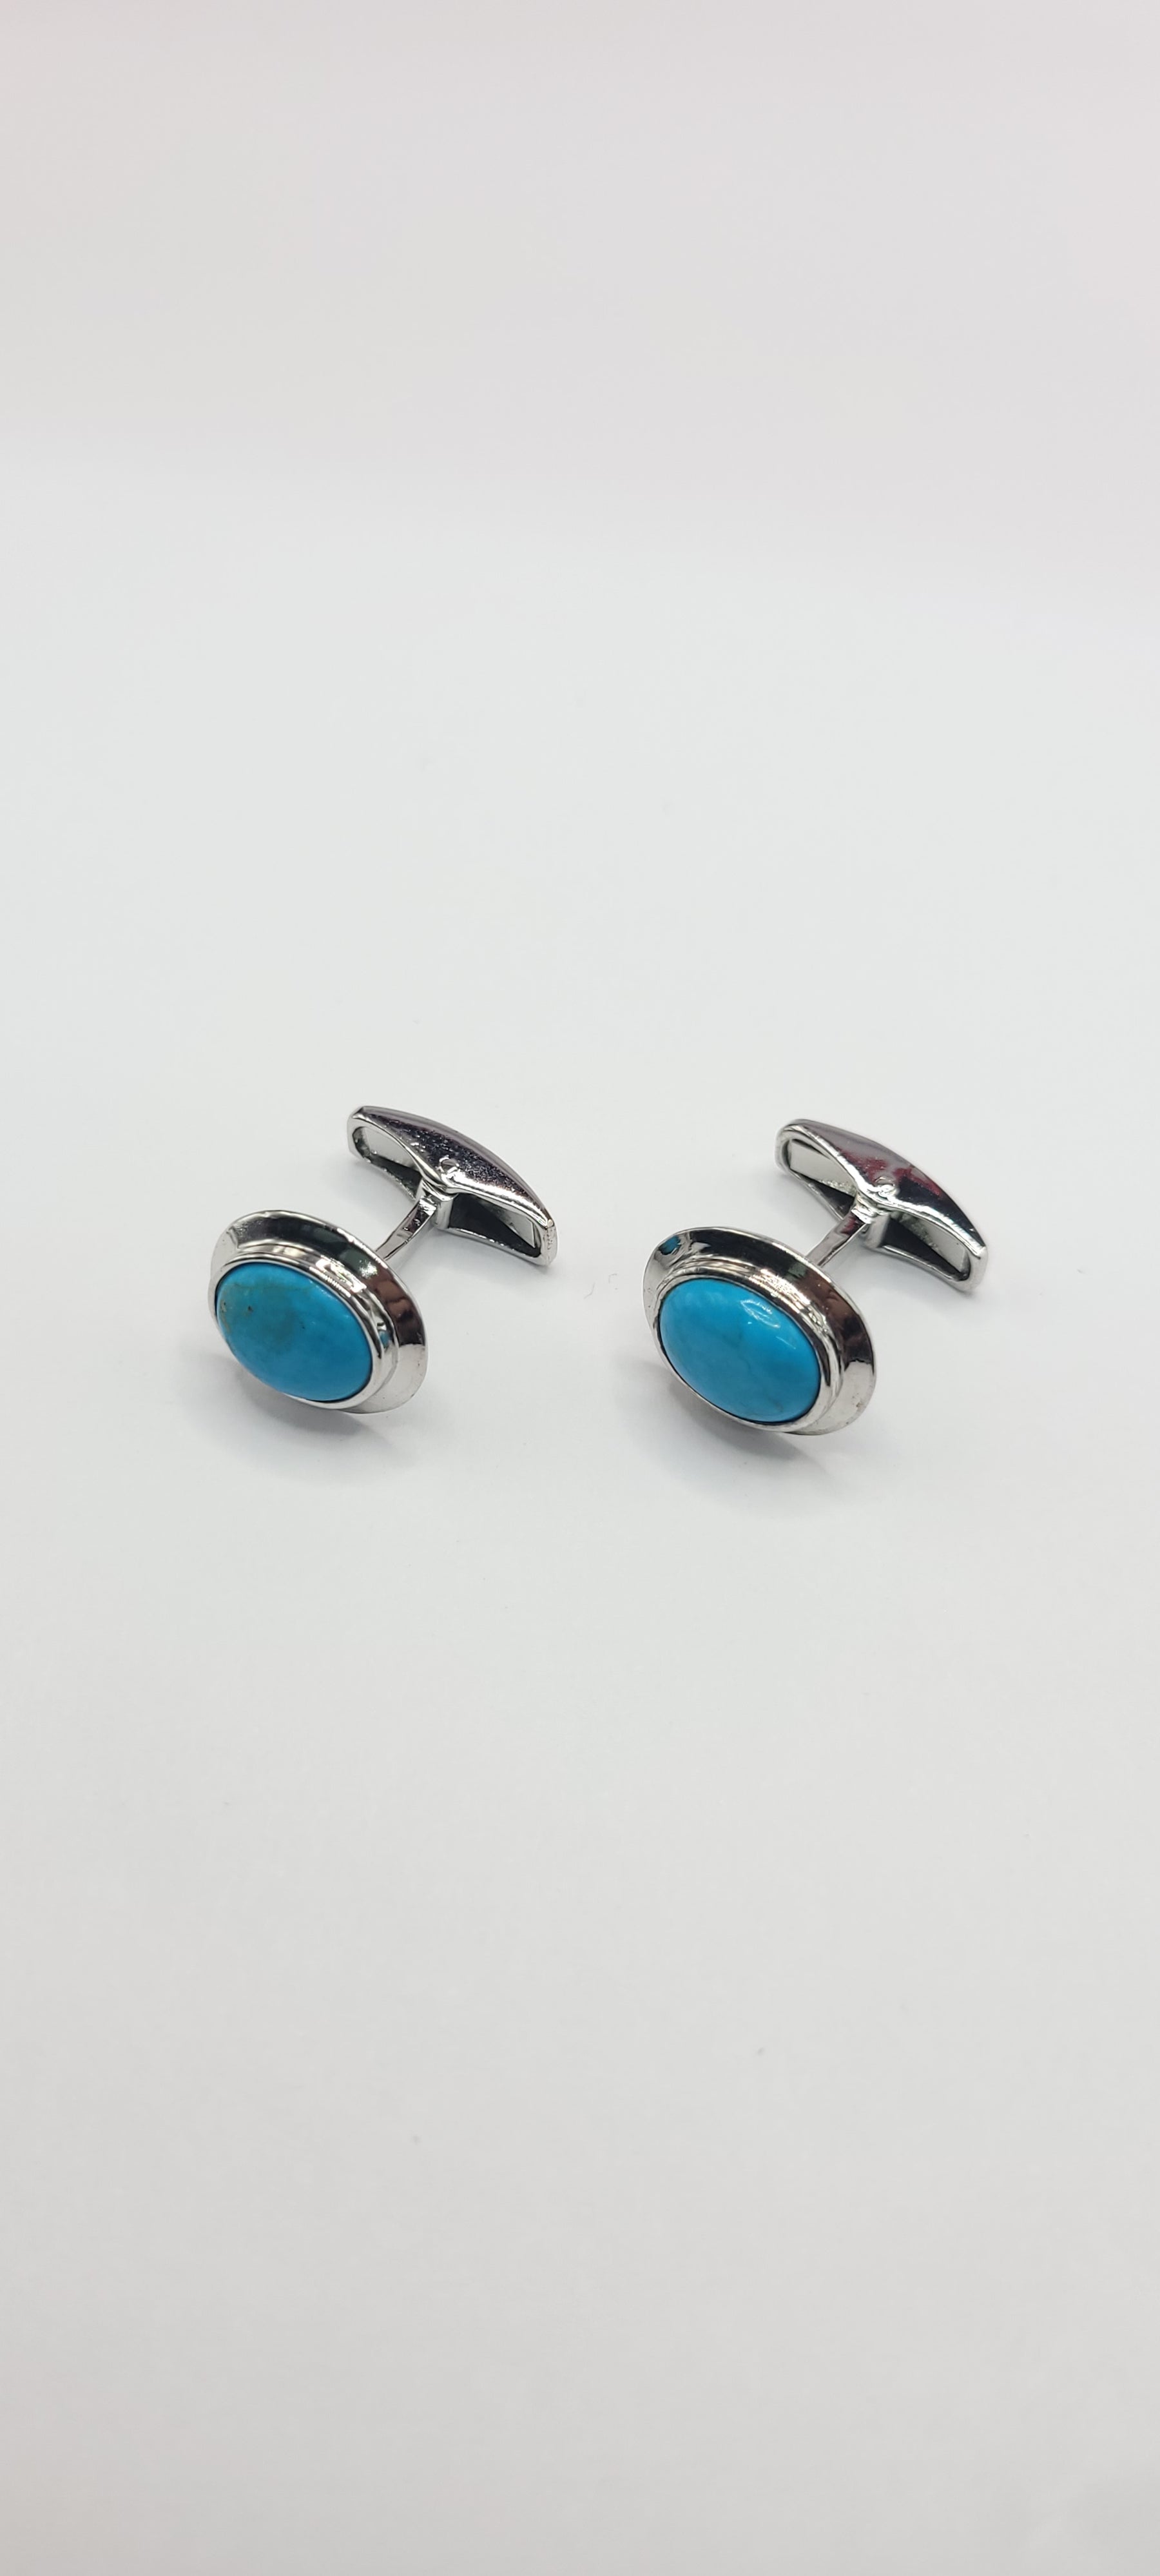 Turquoise stone on real silver cufflinks